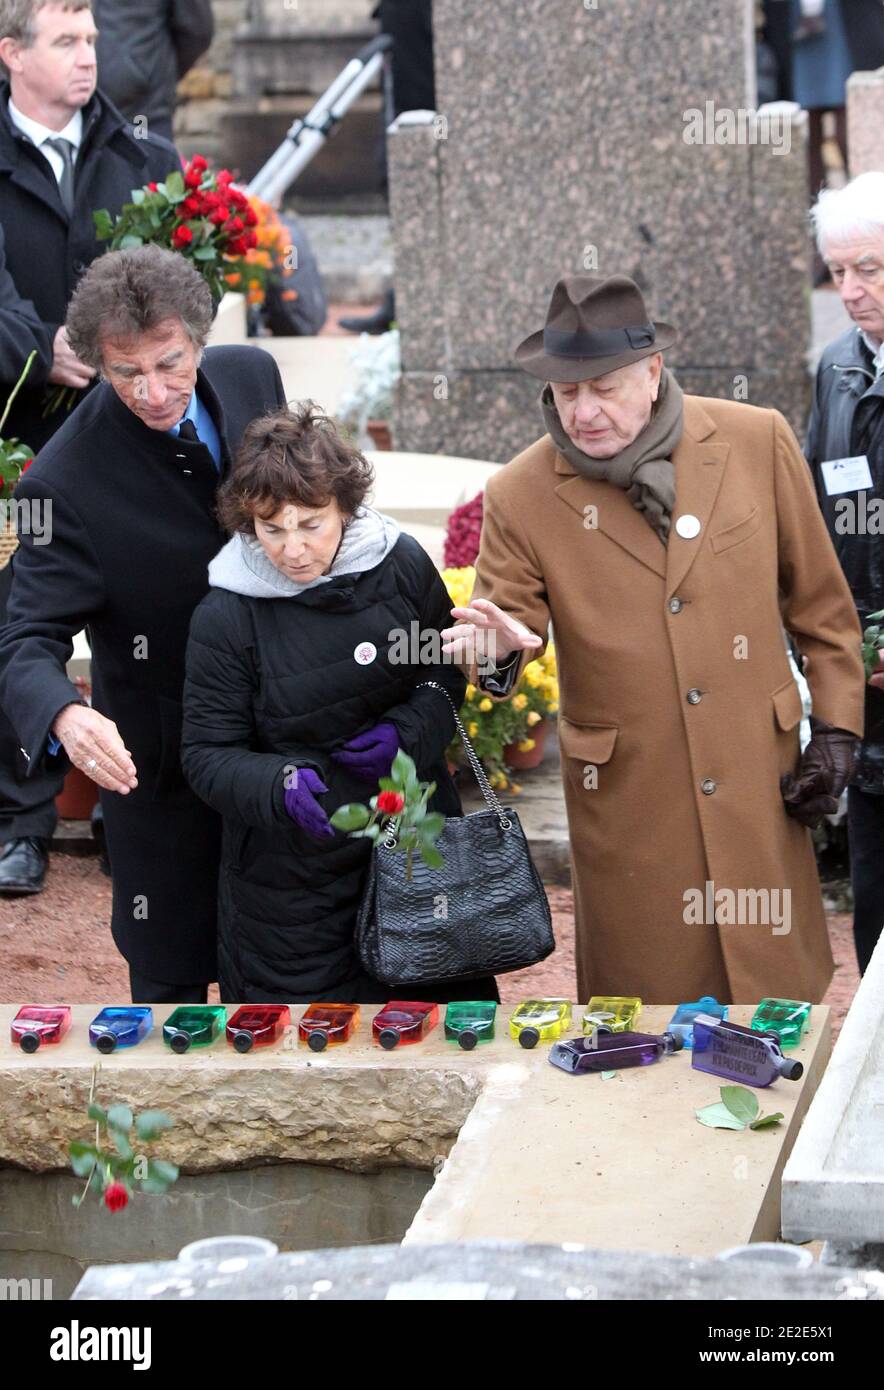 Jack lang , his wife and Pierre Berge attending the funeral of Danielle Mitterrand on November 26, 2011 in Cluny, France. Danielle Mitterrand, First lady of France between 1981 and 1995 and human rights campaigner died in Paris on November 22, 2011. Photo by Vincent Dargent/ABACAPRESS.COM Stock Photo